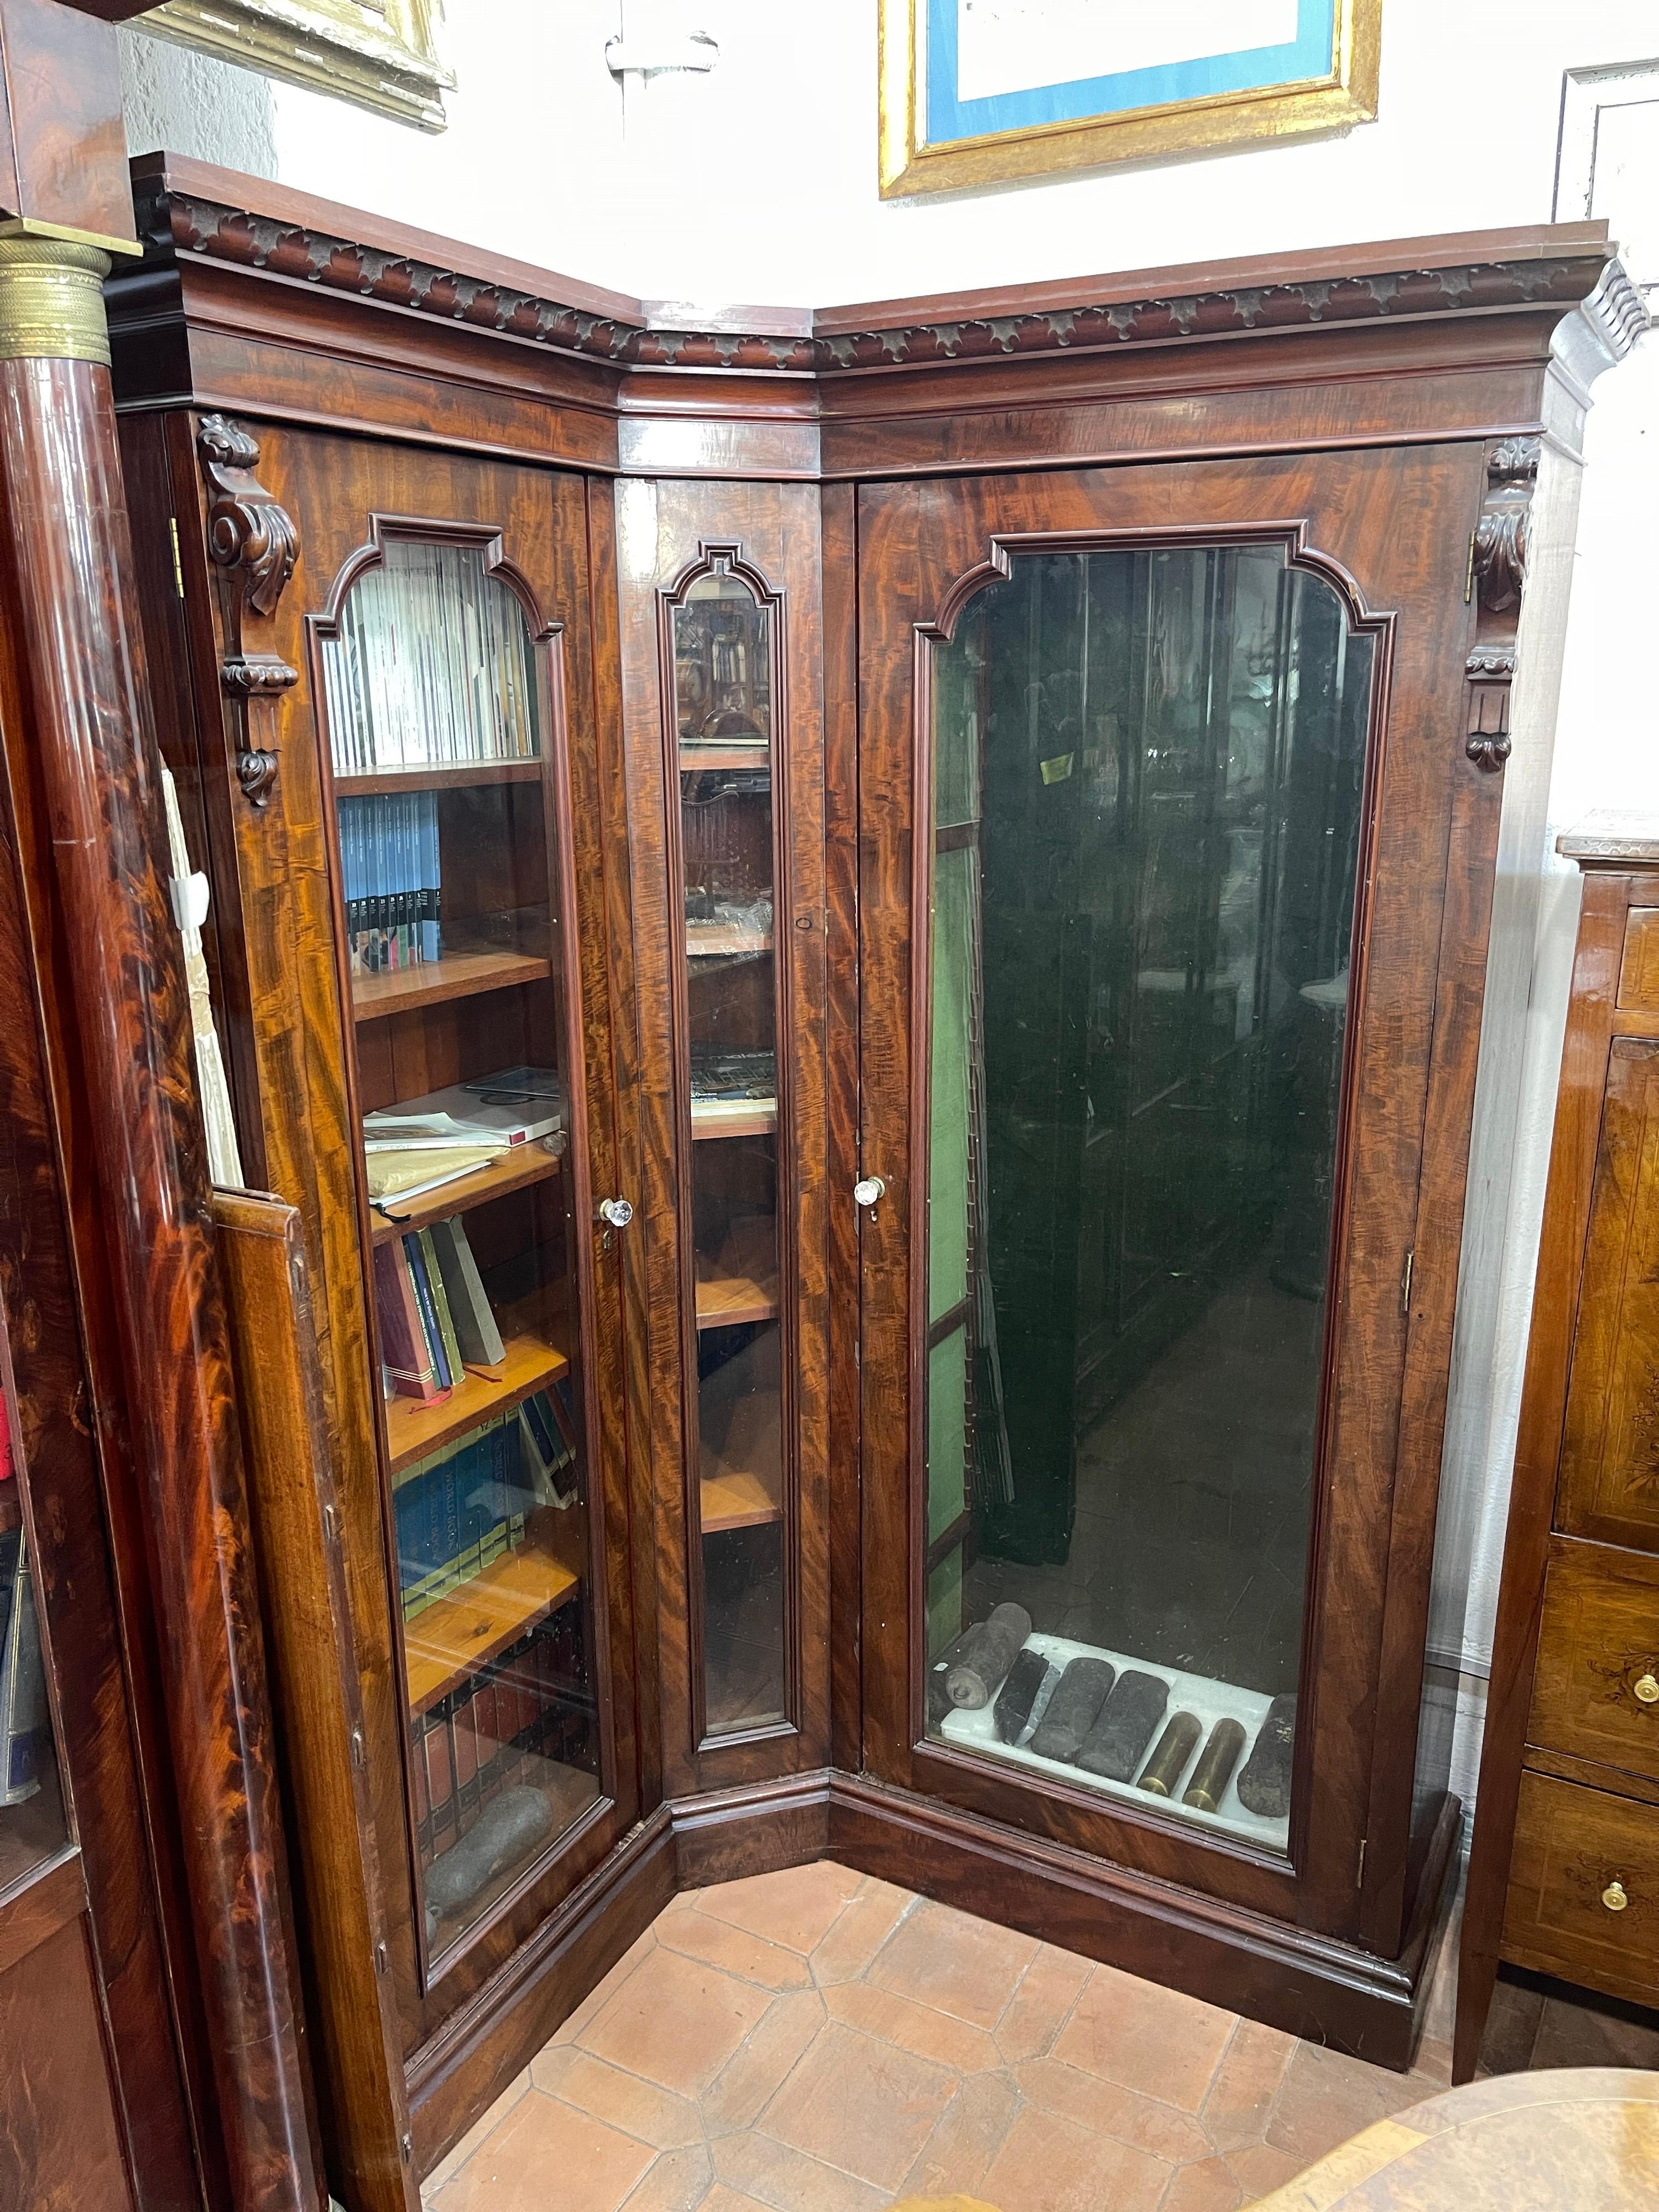 Rare English study cabinet, corner bookcase, with two doors and a small fixed door, in mahogany wood of great quality and with a beautiful grain. Enriched by carved parts. Early Victorian period. On one side fixed shelves, on the other side movable